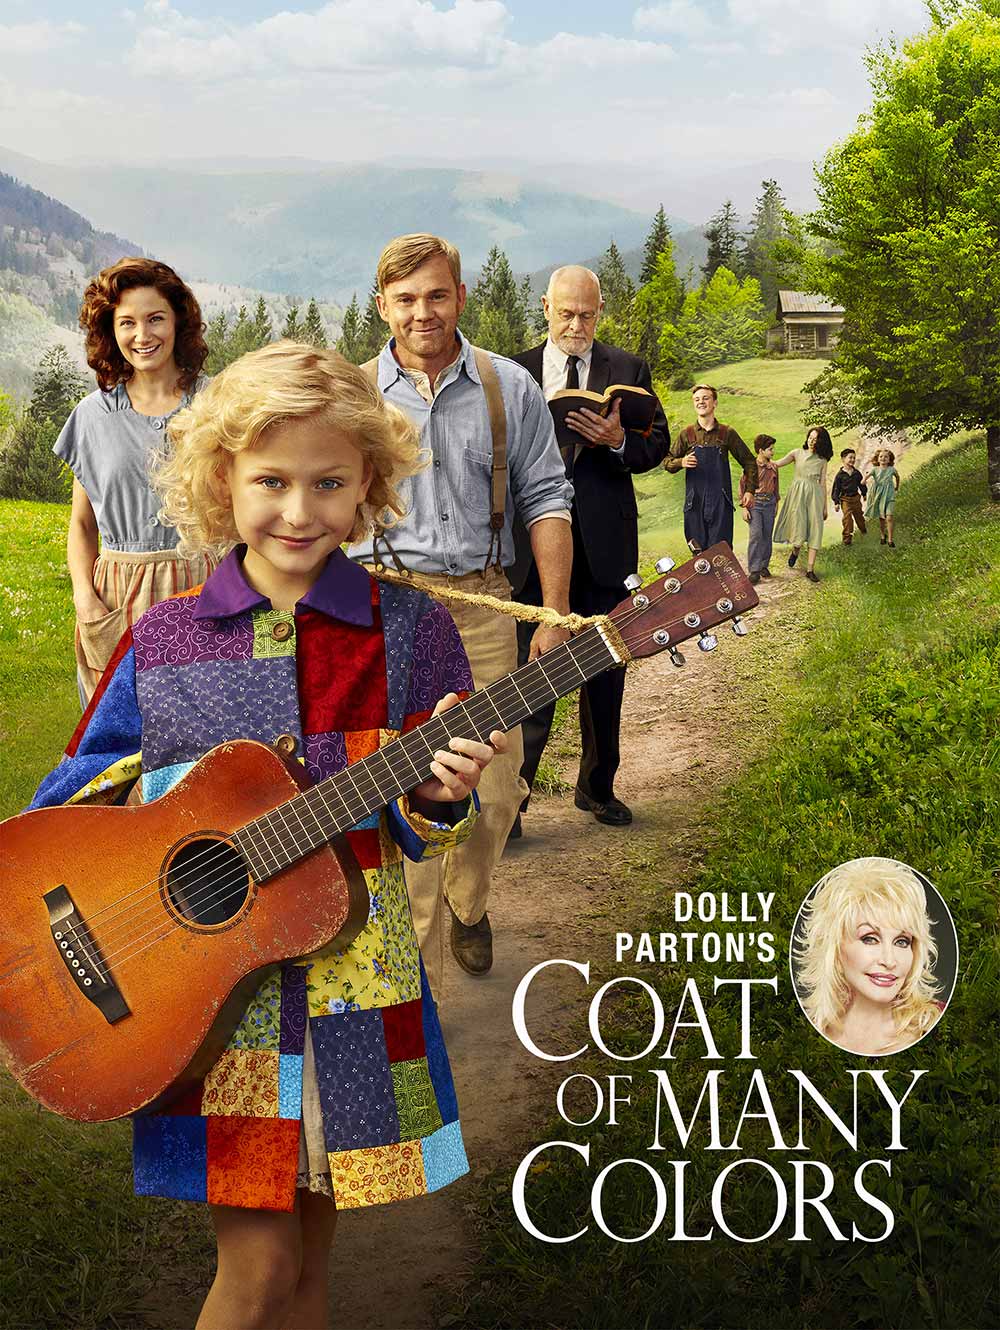 Dolly Parton’s Coat of Many Colors Movie Review